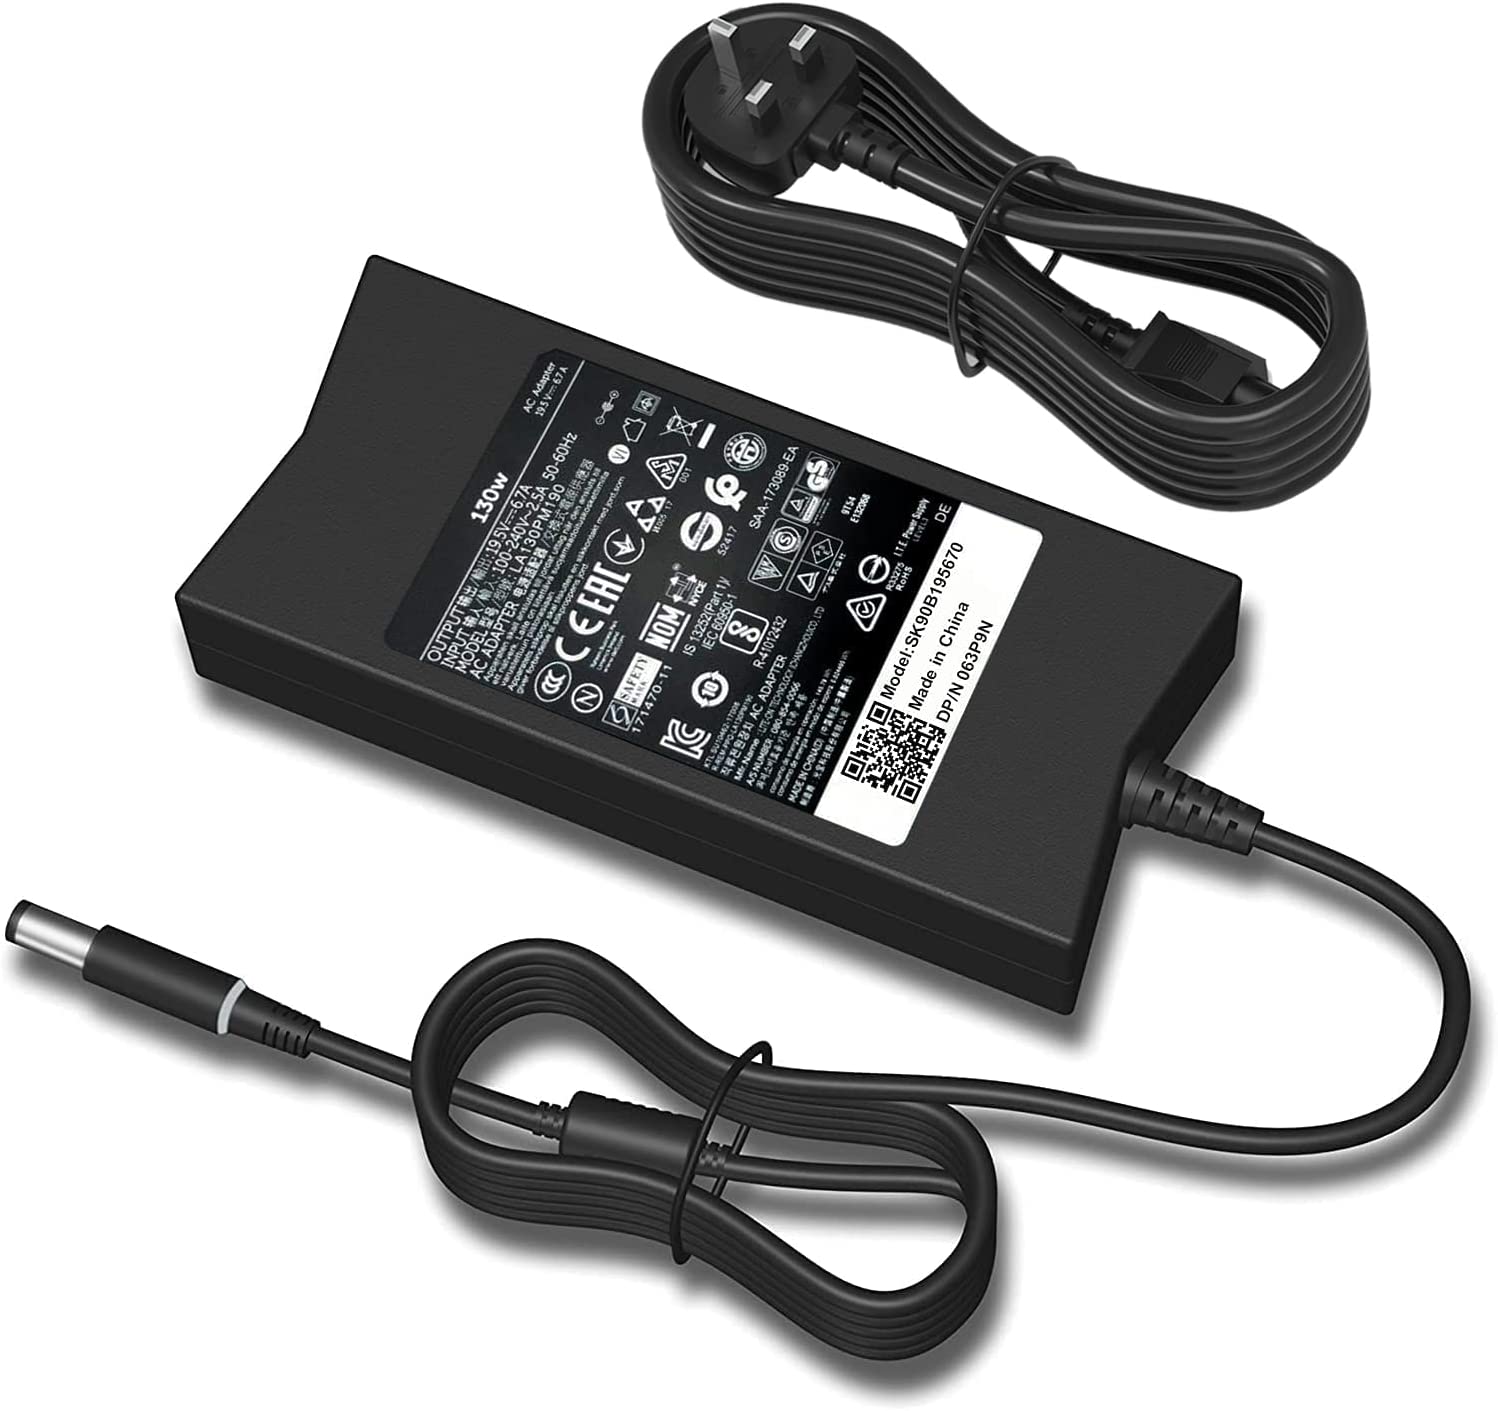 Dell Vostro 1710 AC Adapter Charger